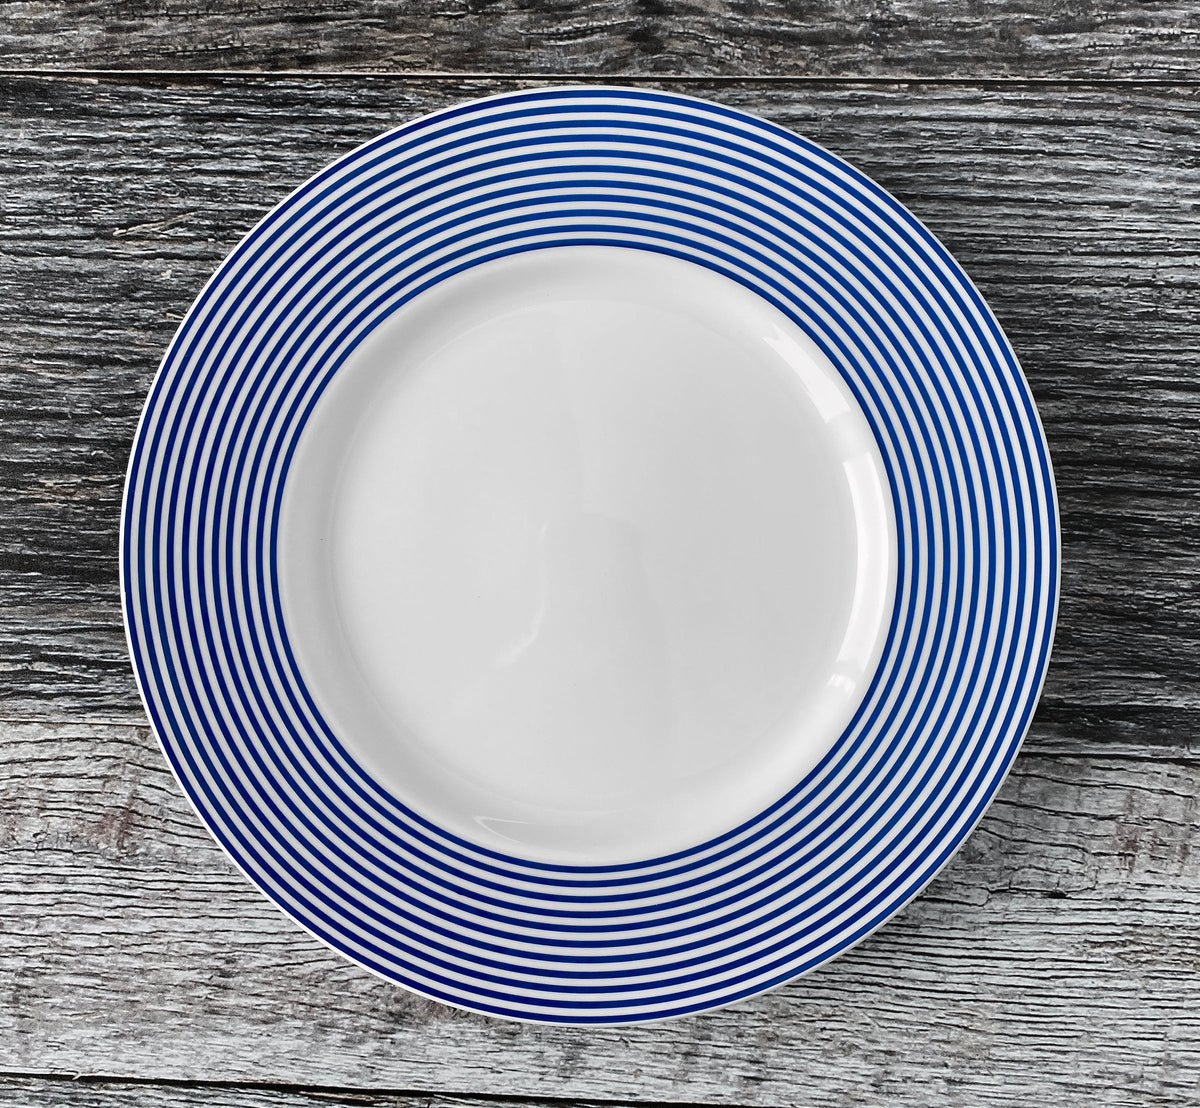 A Newport Racing Stripe Rimmed Salad Plate by Caskata Artisanal Home on a wooden table.